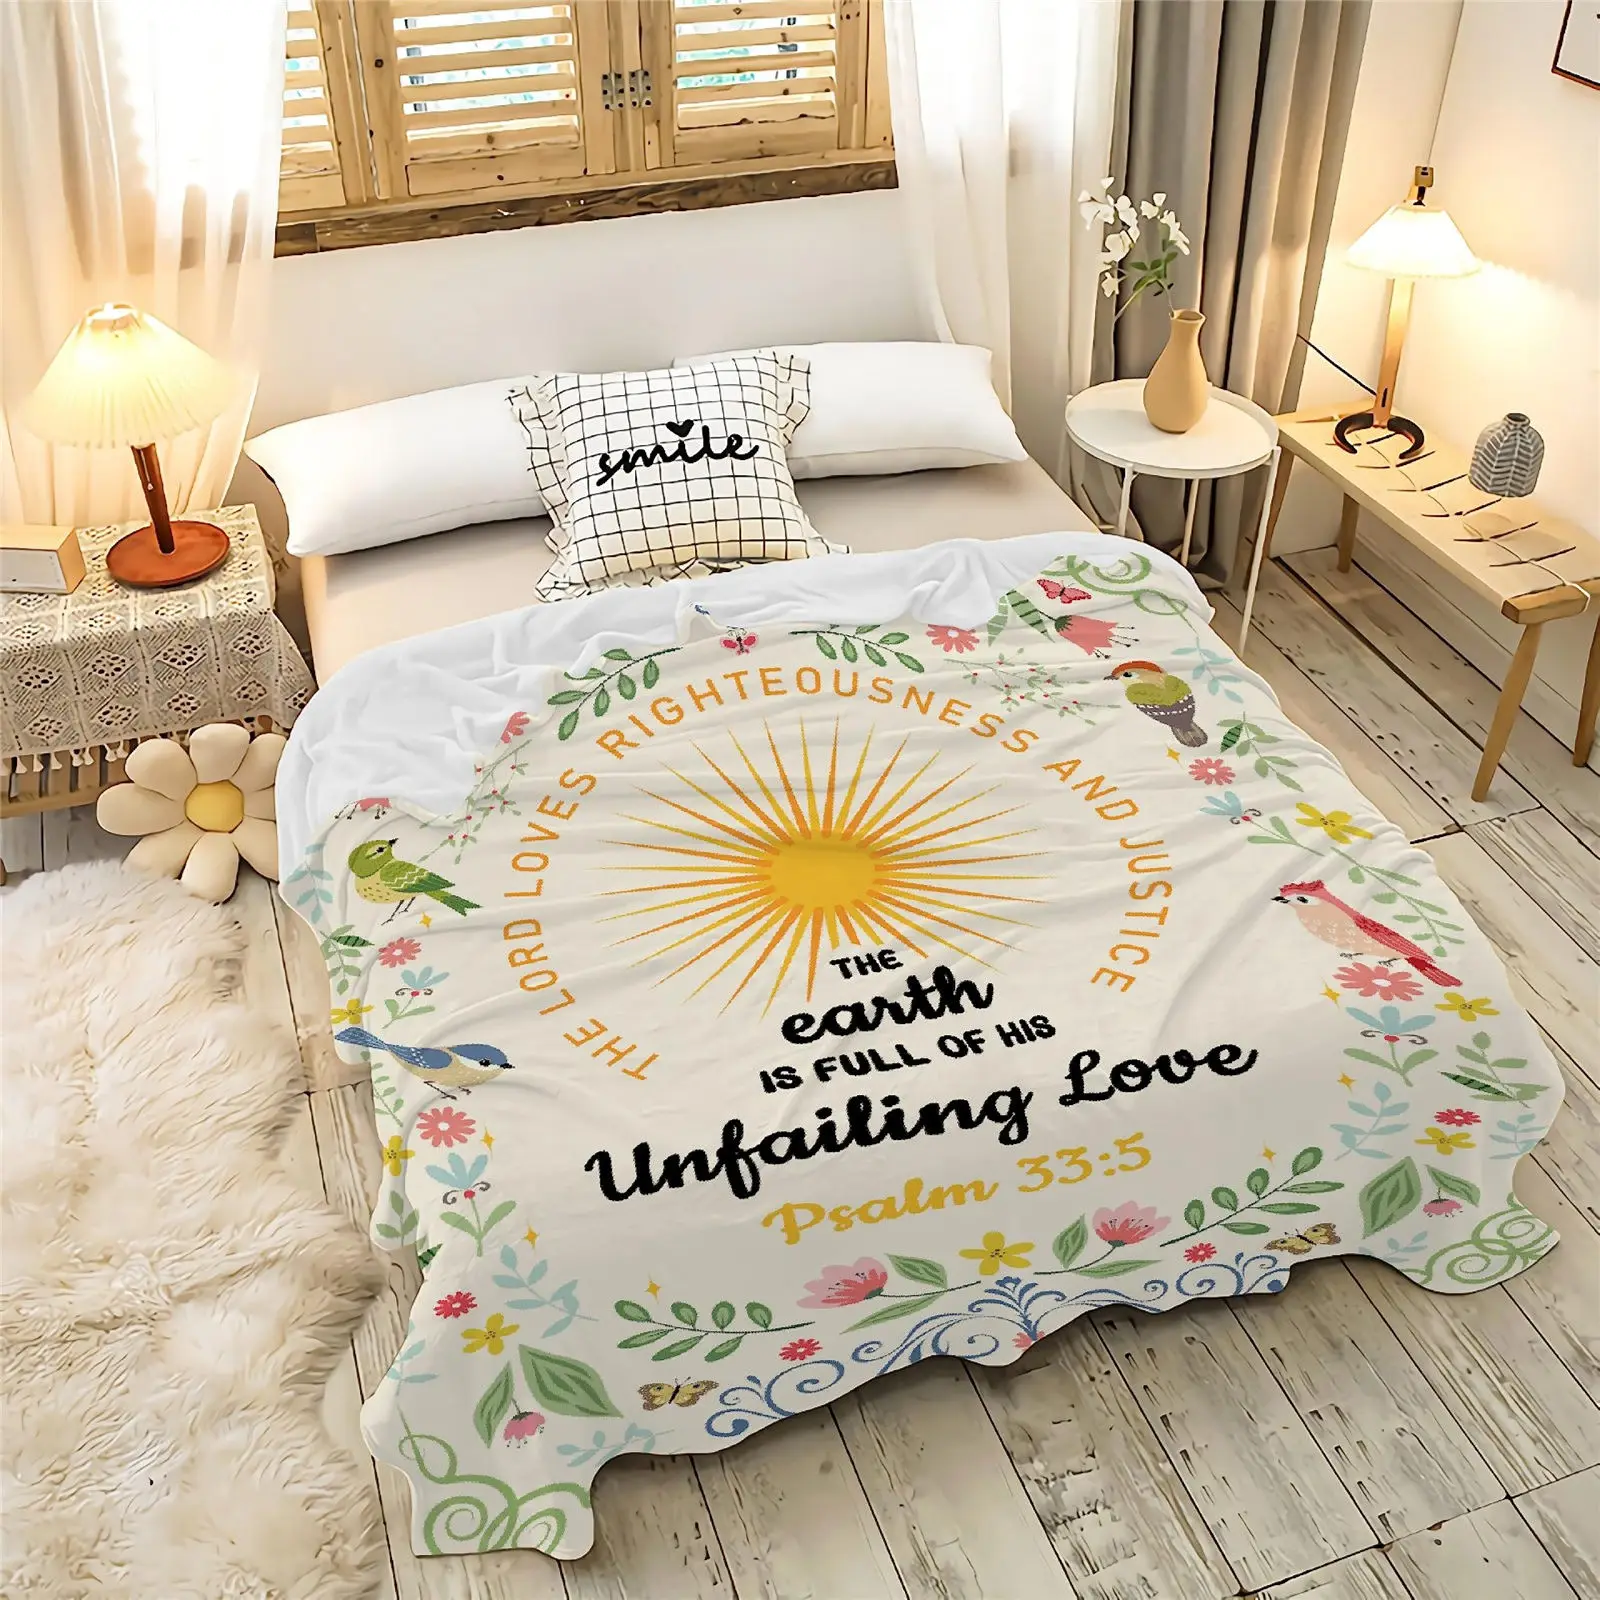 

KACISSTY Fashion Flannel Blankets Floral Bible Verse Printed Fleece Throw Blanket Lightweight Soft Bed Quilts Home Decor